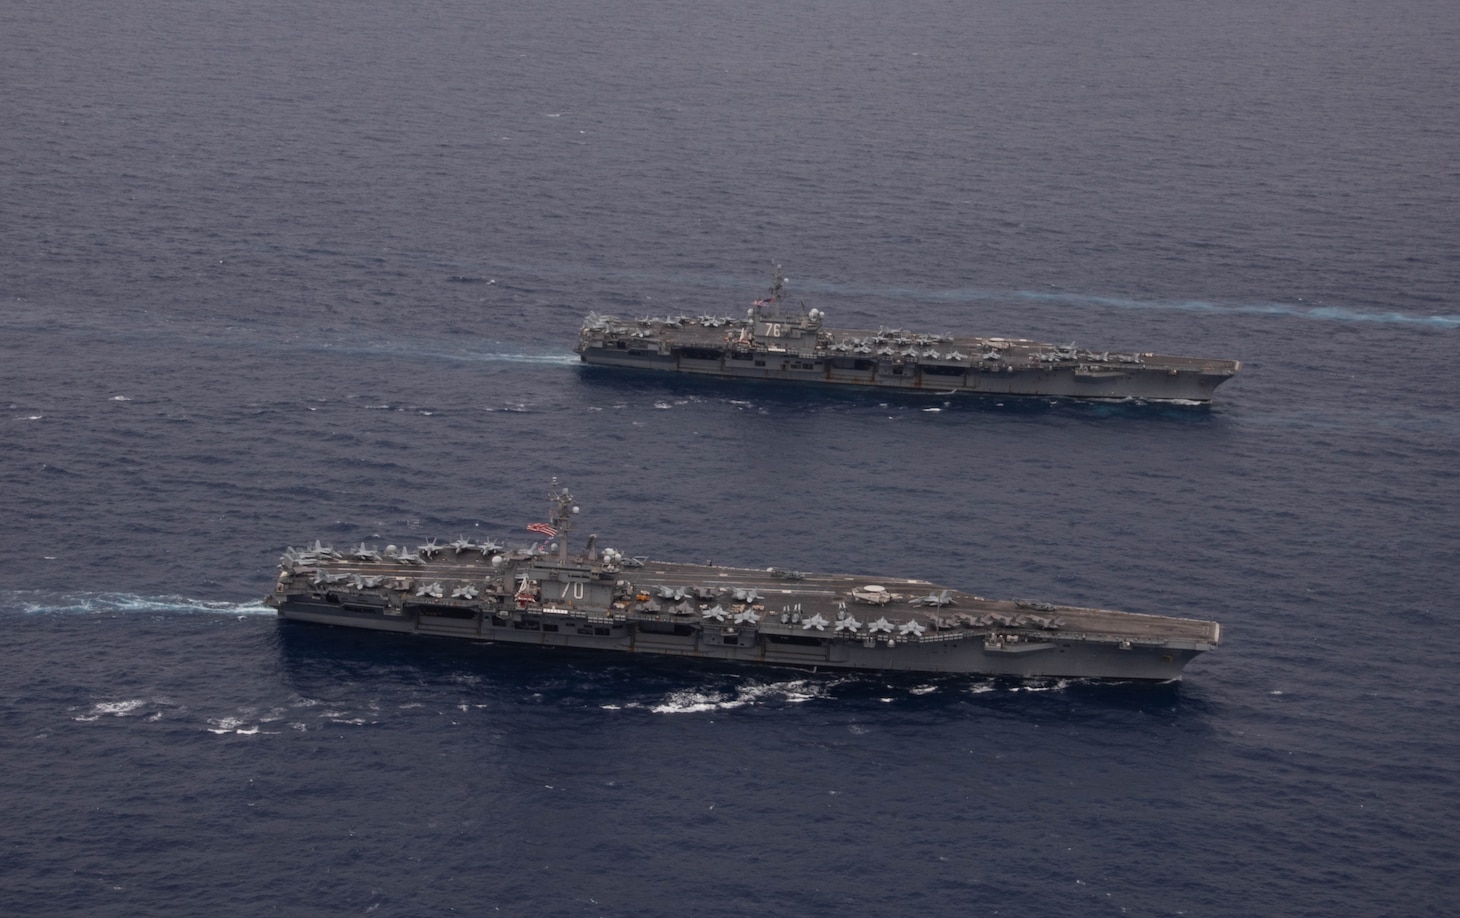 PHILIPPINE SEA (Nov. 7, 2023) Nimitz-class aircraft carriers, USS Ronald Reagan (CVN 76) and USS Carl Vinson (CVN 70), steam in formation during the Multi-Large Deck Exercise (MLDE) in the Philippine Sea, Nov. 7. Ronald Reagan is participating in the bilateral MLDE, which features the ships and aircraft of JMSDF Escort Flotilla 3, as well as the U.S. Navy’s Carrier Strike Group 1 and Carrier Strike Group 5. MLDE is a multi-domain event that grows the already strong partnership and interoperability that exists between the JMSDF and U.S. Navy today. (U.S. Navy photo by Mass Communication Specialist 3rd Class Natasha ChevalierLosada)